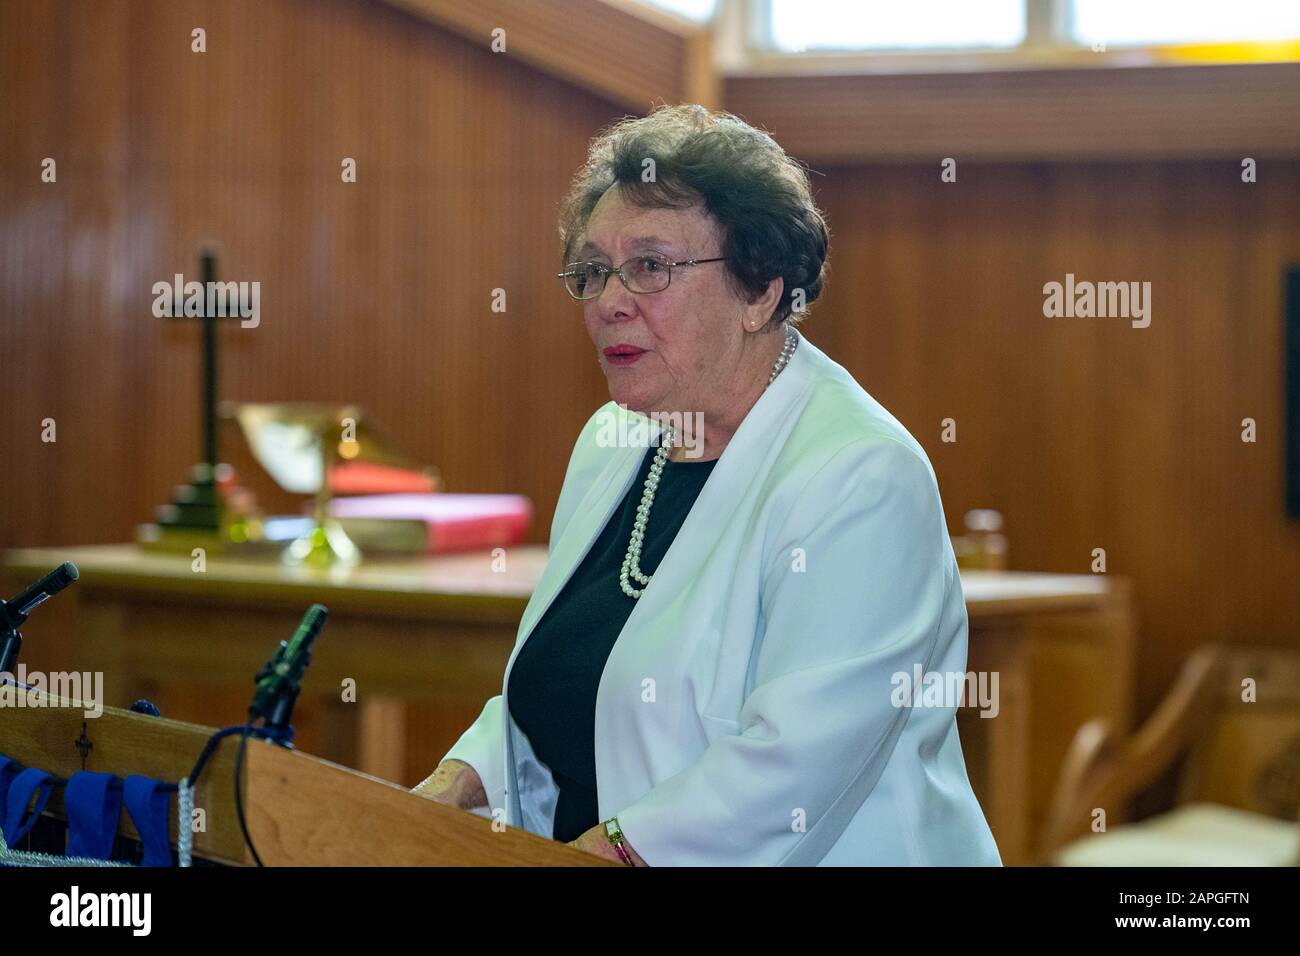 Brentwood Essex, UK. 23rd Jan, 2020. A public meeting commemorating the 75th anniversary of the liveration of Auschwitz-Birkenau with speaker Susie Barnett BEM a Holocaust survivor, held at Brentwood United Reformed Church Brentwood Essex Credit: Ian Davidson/Alamy Live News Stock Photo